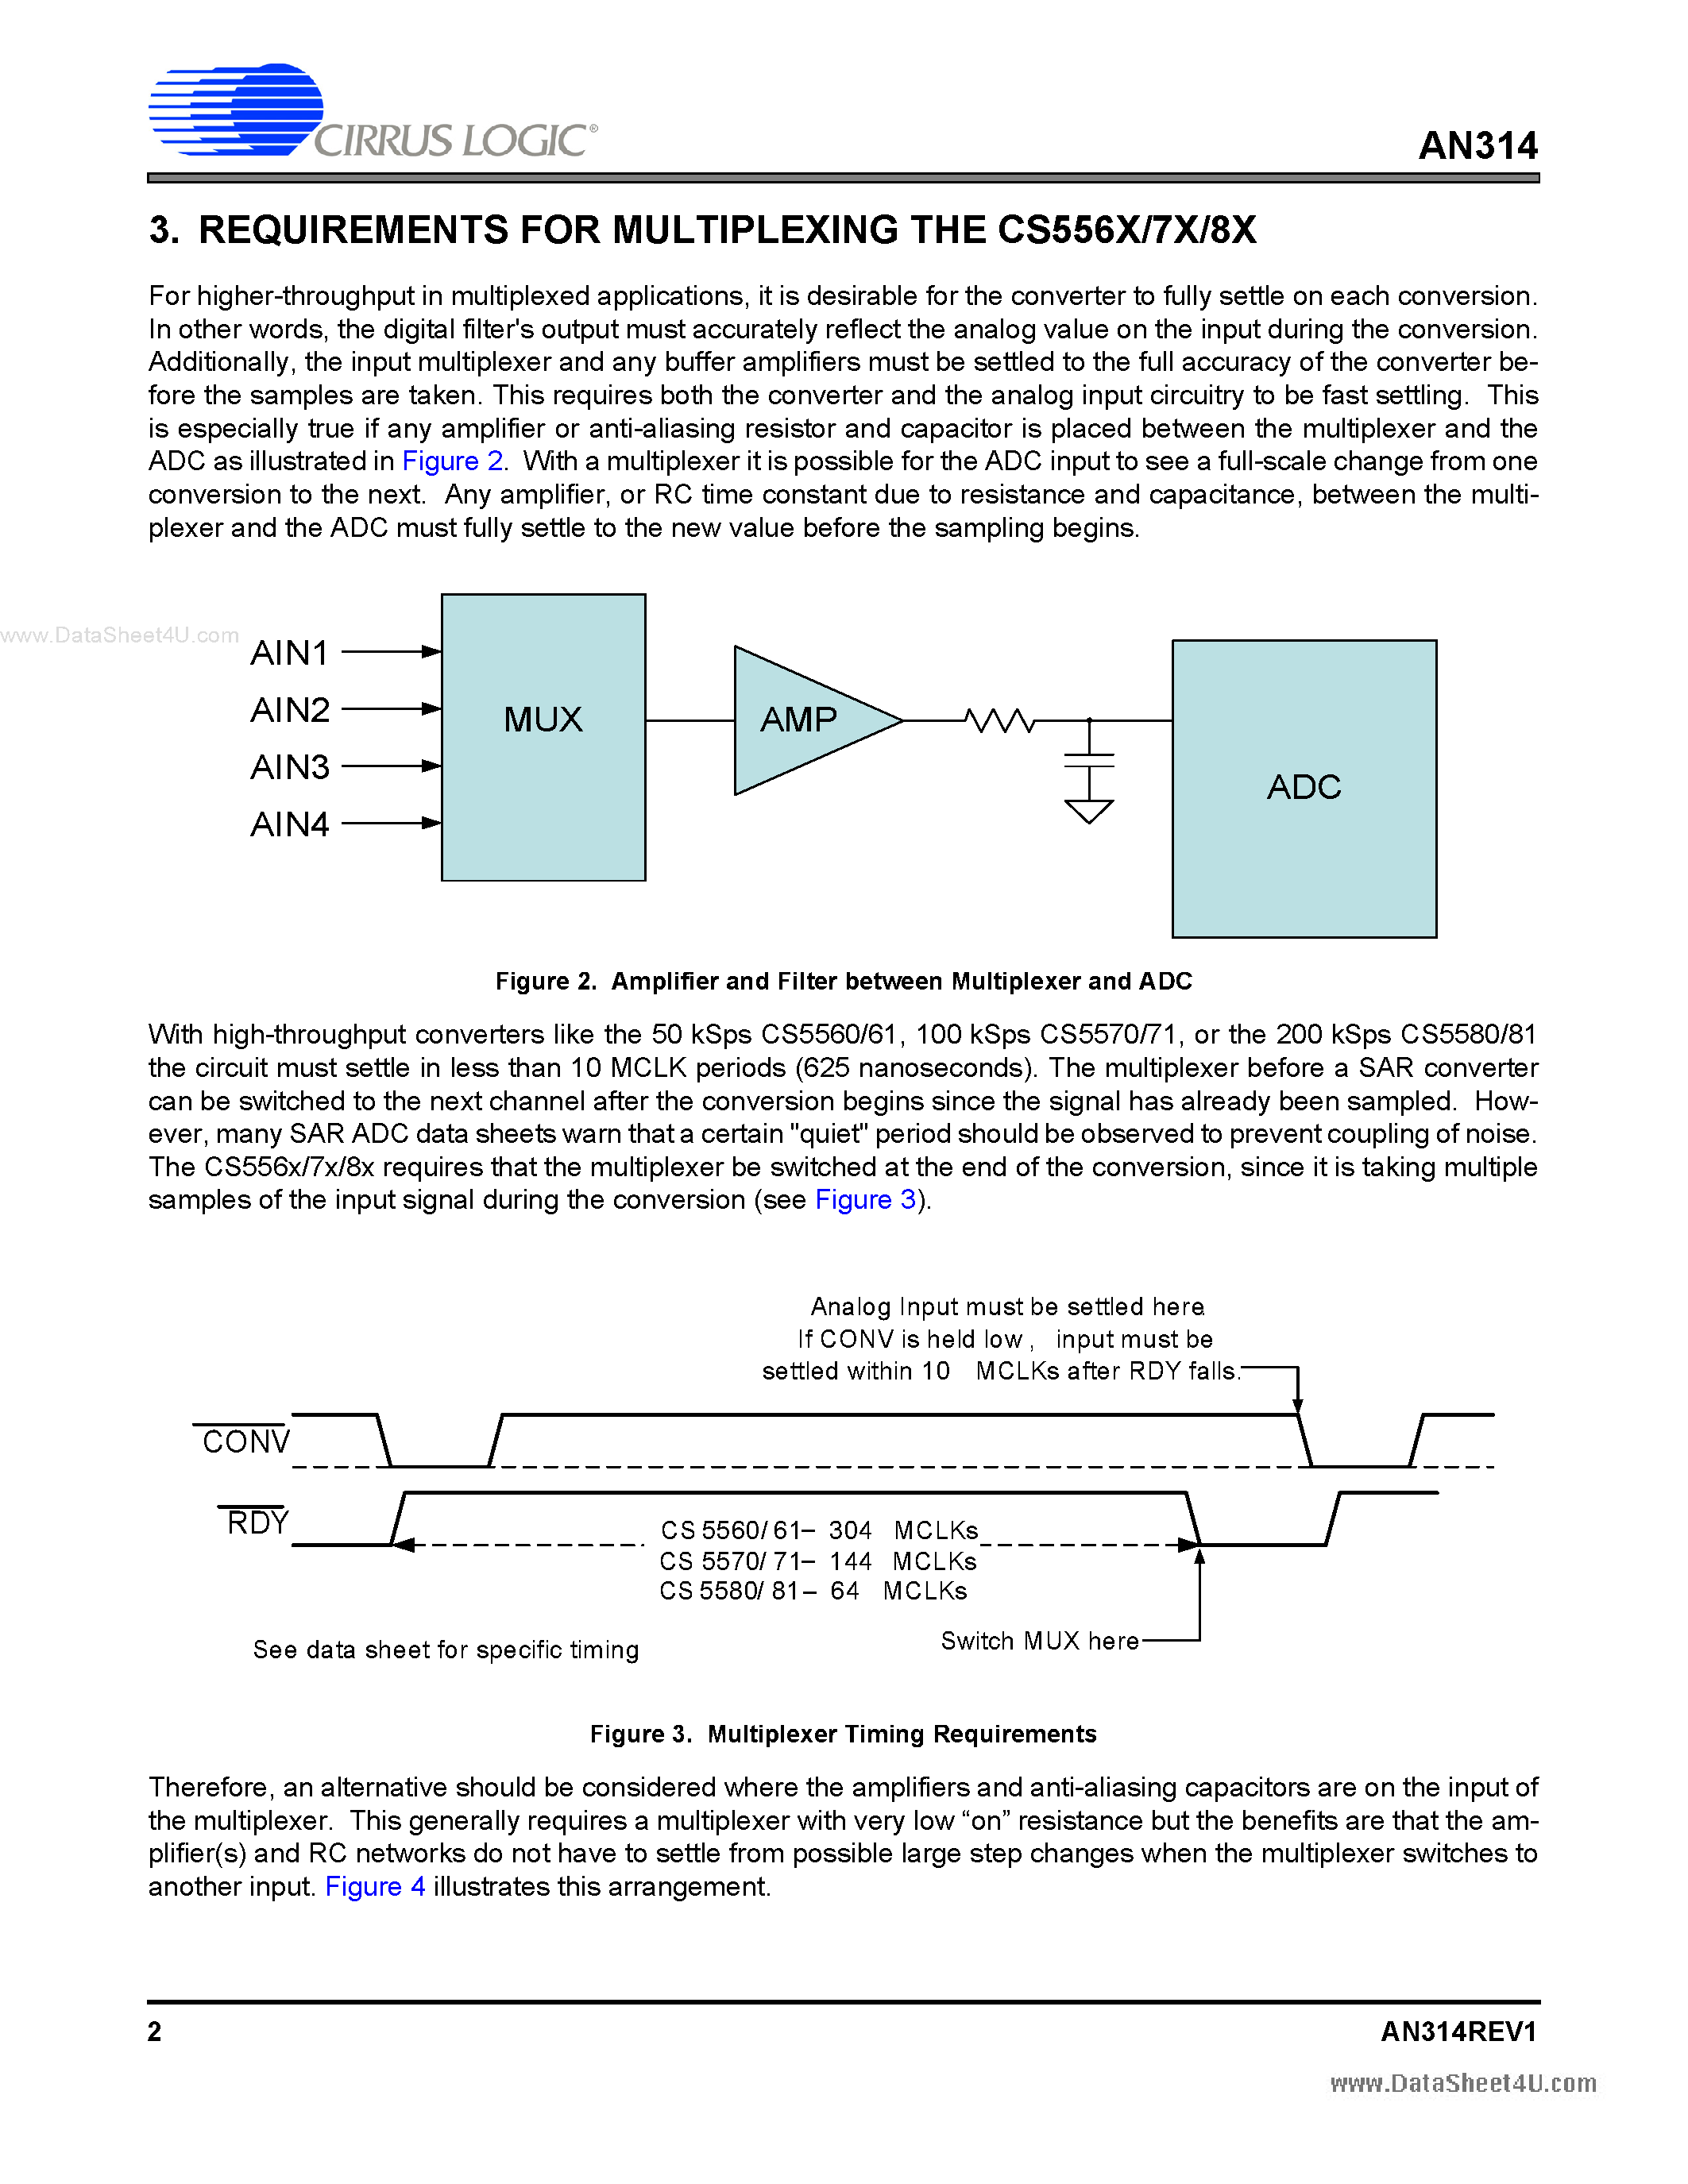 Datasheet AN314 - Multiplexing the CS556x/7x/8x Delta-Sigma ADCx page 2